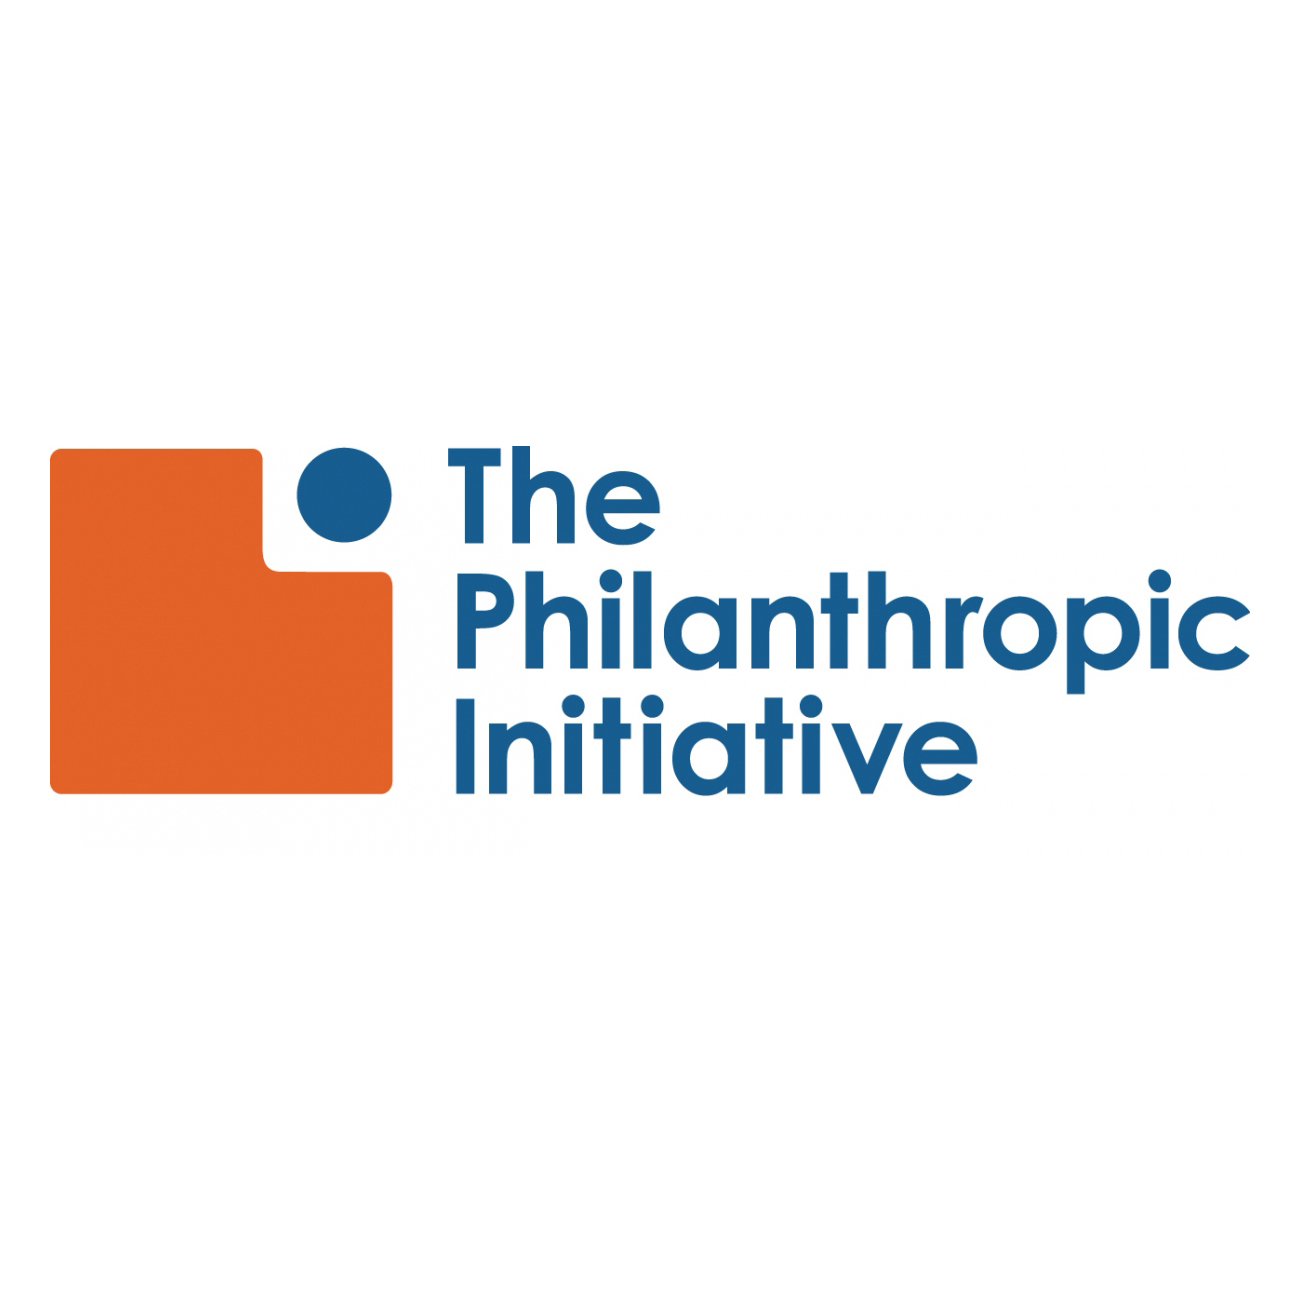 The Philanthropic Initiative logo - those words with an orange and blue geometric design to the left of the words.